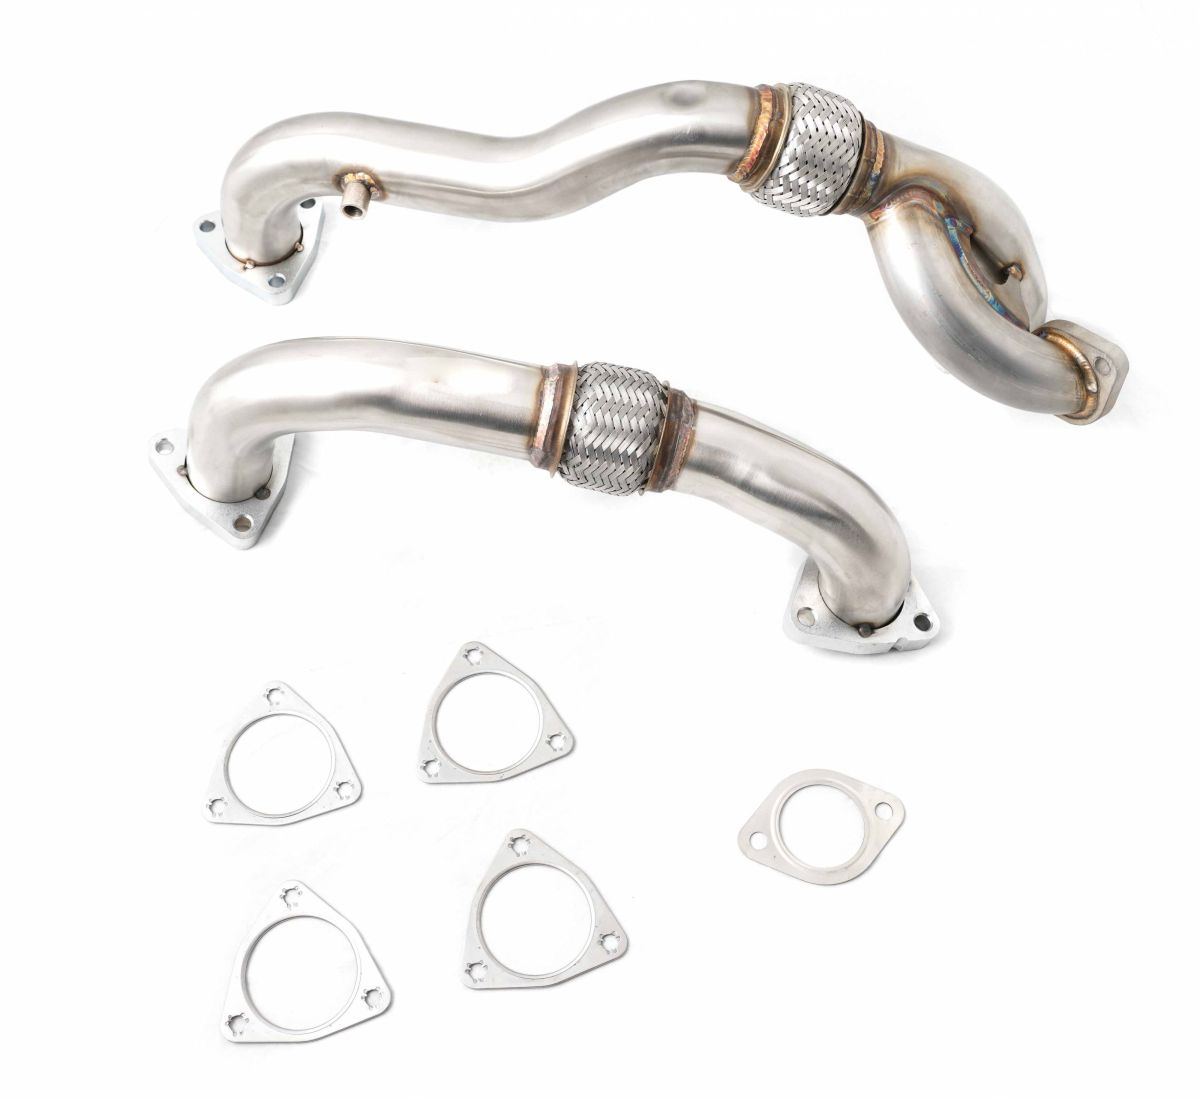 Rudy's Performance Parts - Rudy's Heavy Duty Replacement Up Pipe Kit For 08-10 6.4L Powerstroke